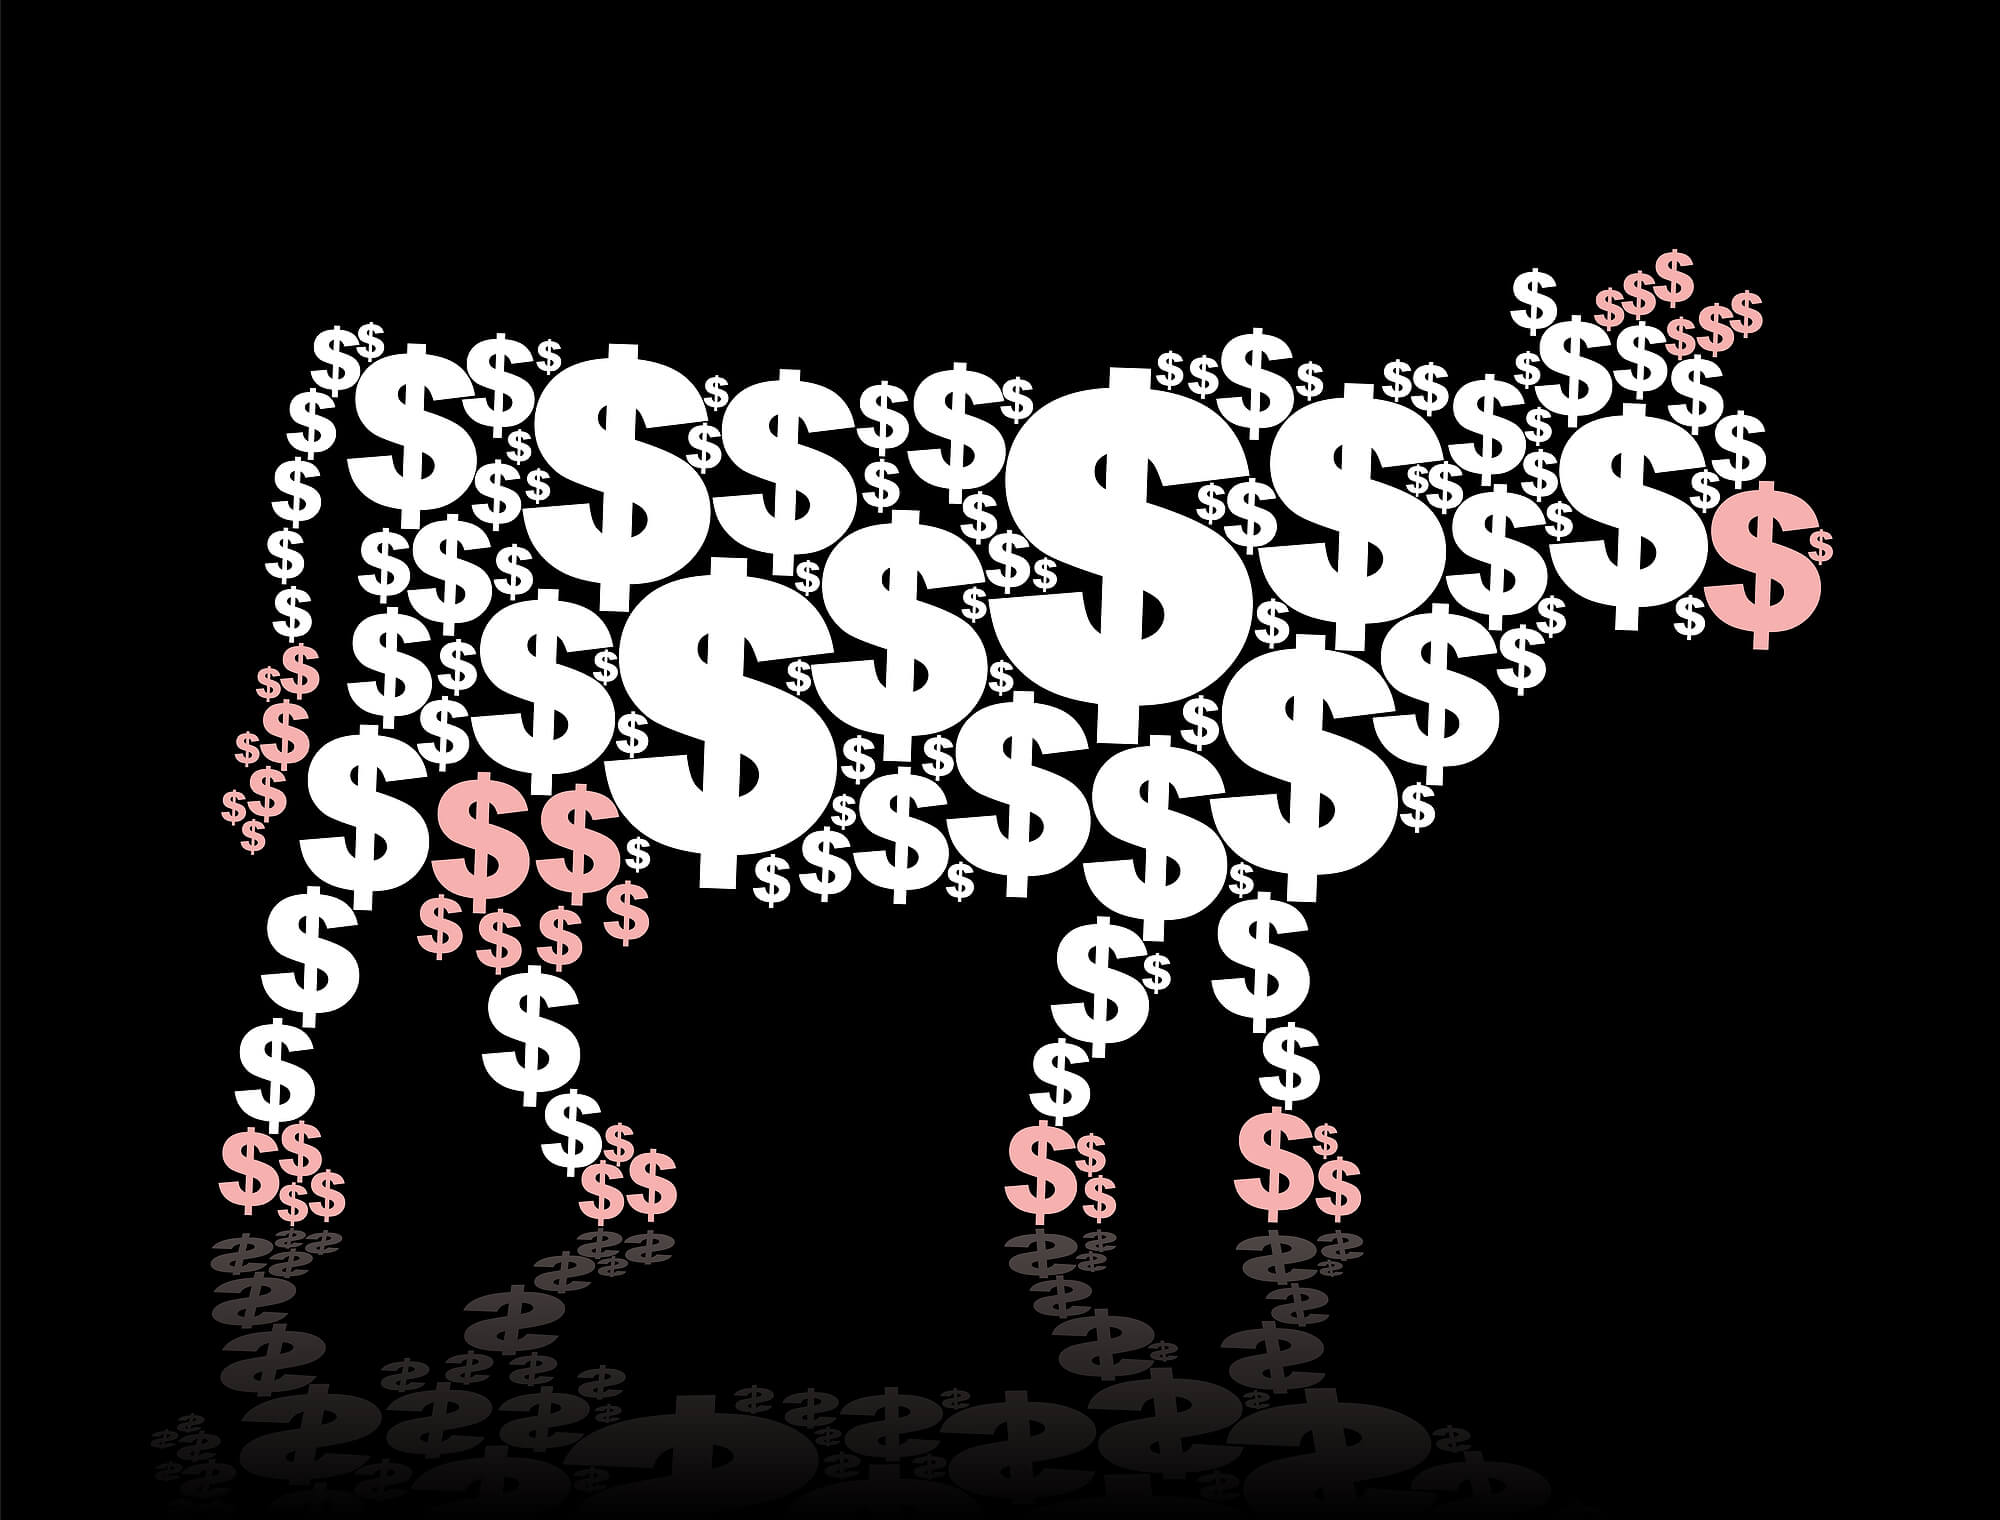 Focusing On Cash Cows To Boost Your Profits